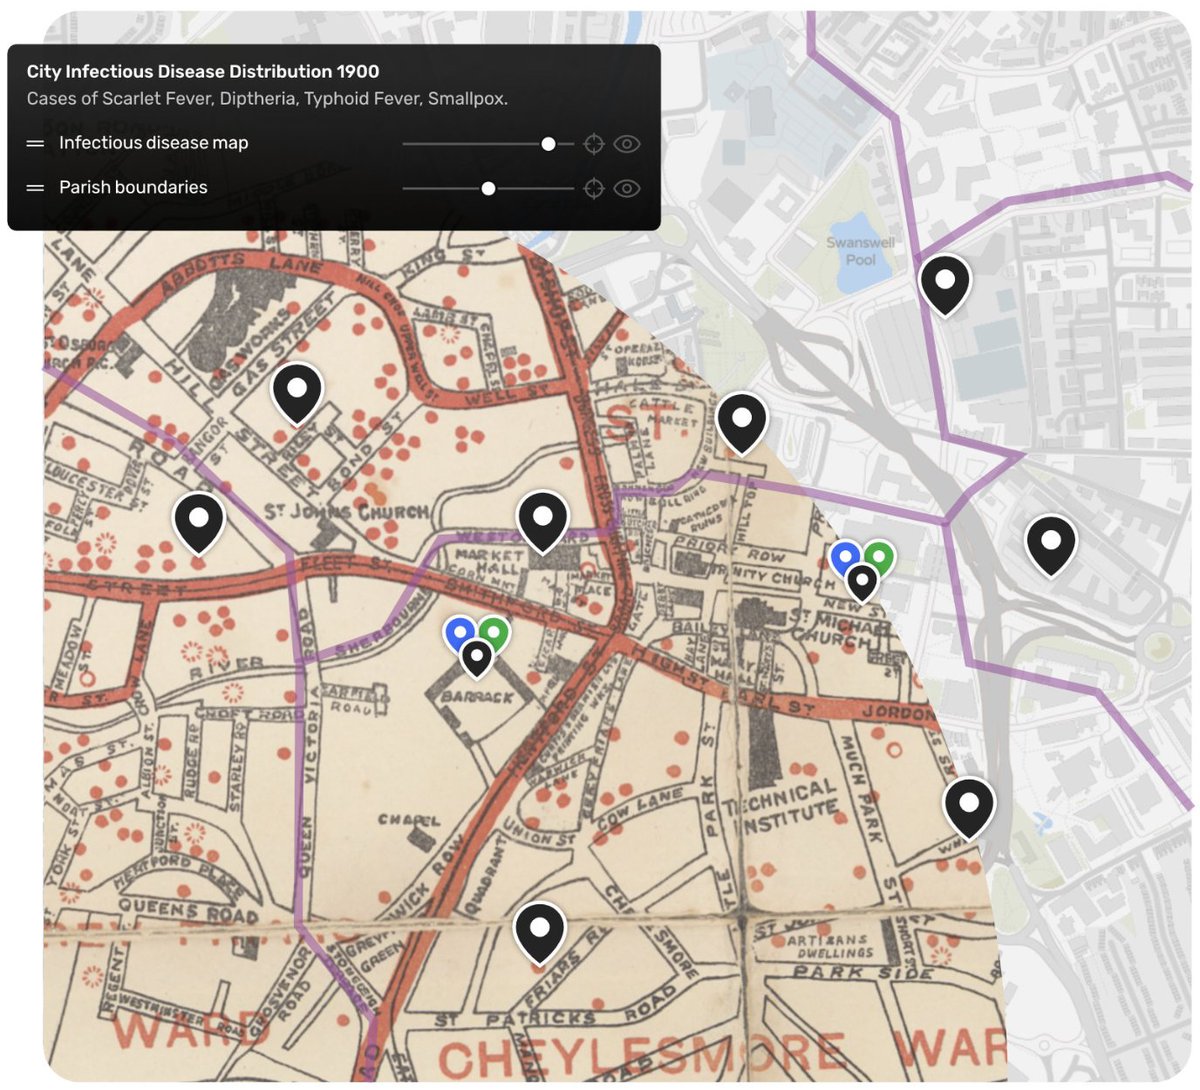 🗺️ Want to share your collections with the world?

Turn databases into experiences with Humap, the storytelling map platform. 

humap.me

#GLAM #StoryMaps #EdTech #Maps #DigitalHumanities #HGIS #GIS